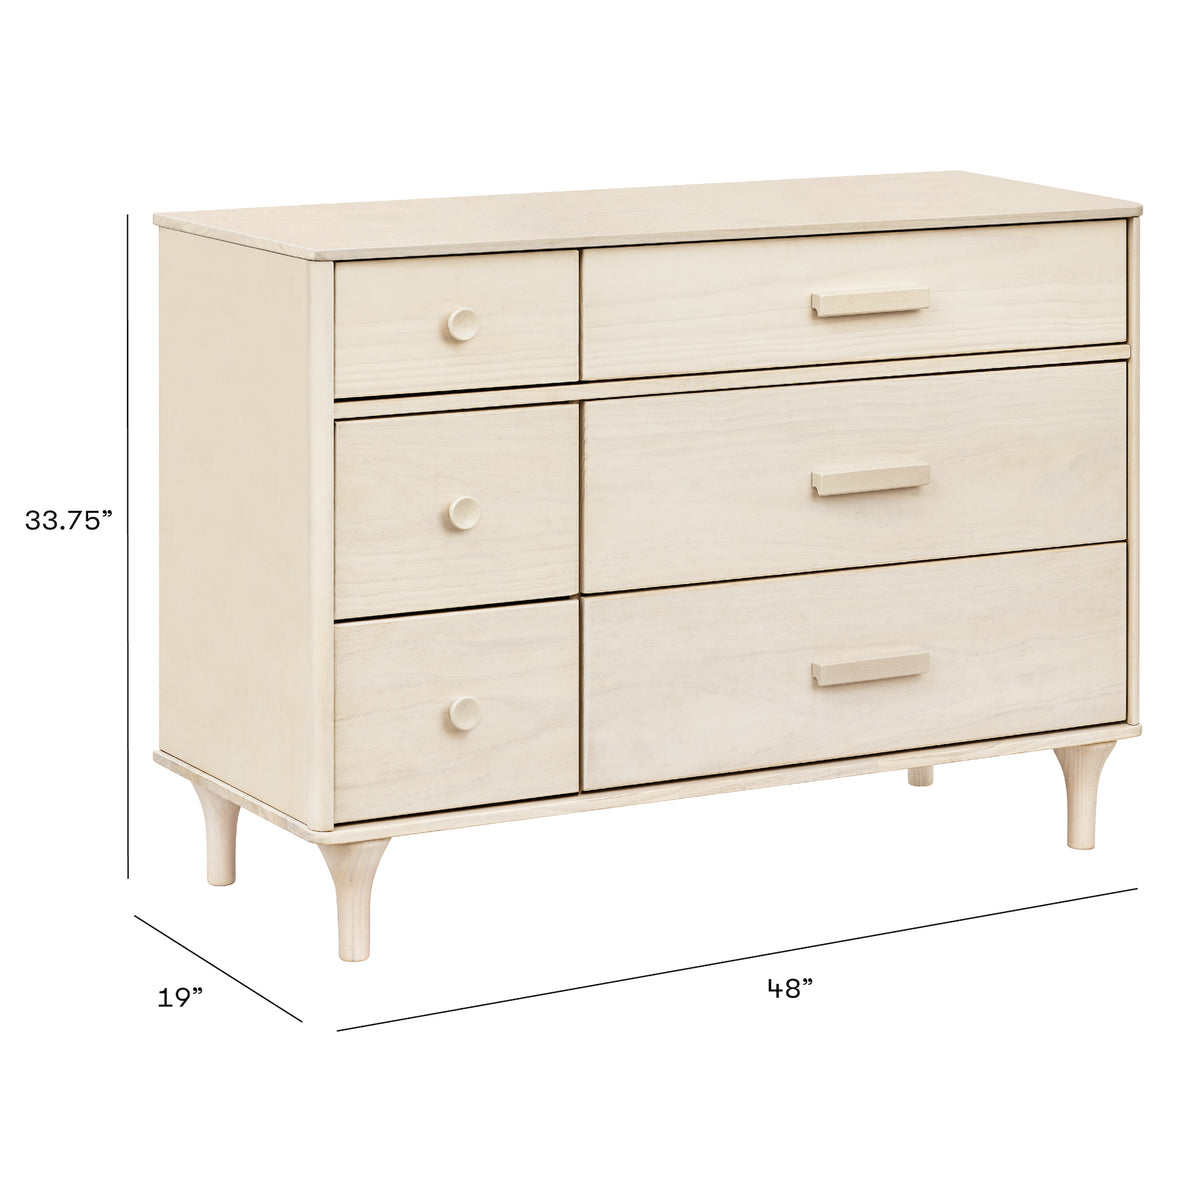 Lolly 6-Drawer Assembled Double Dresser - Natural